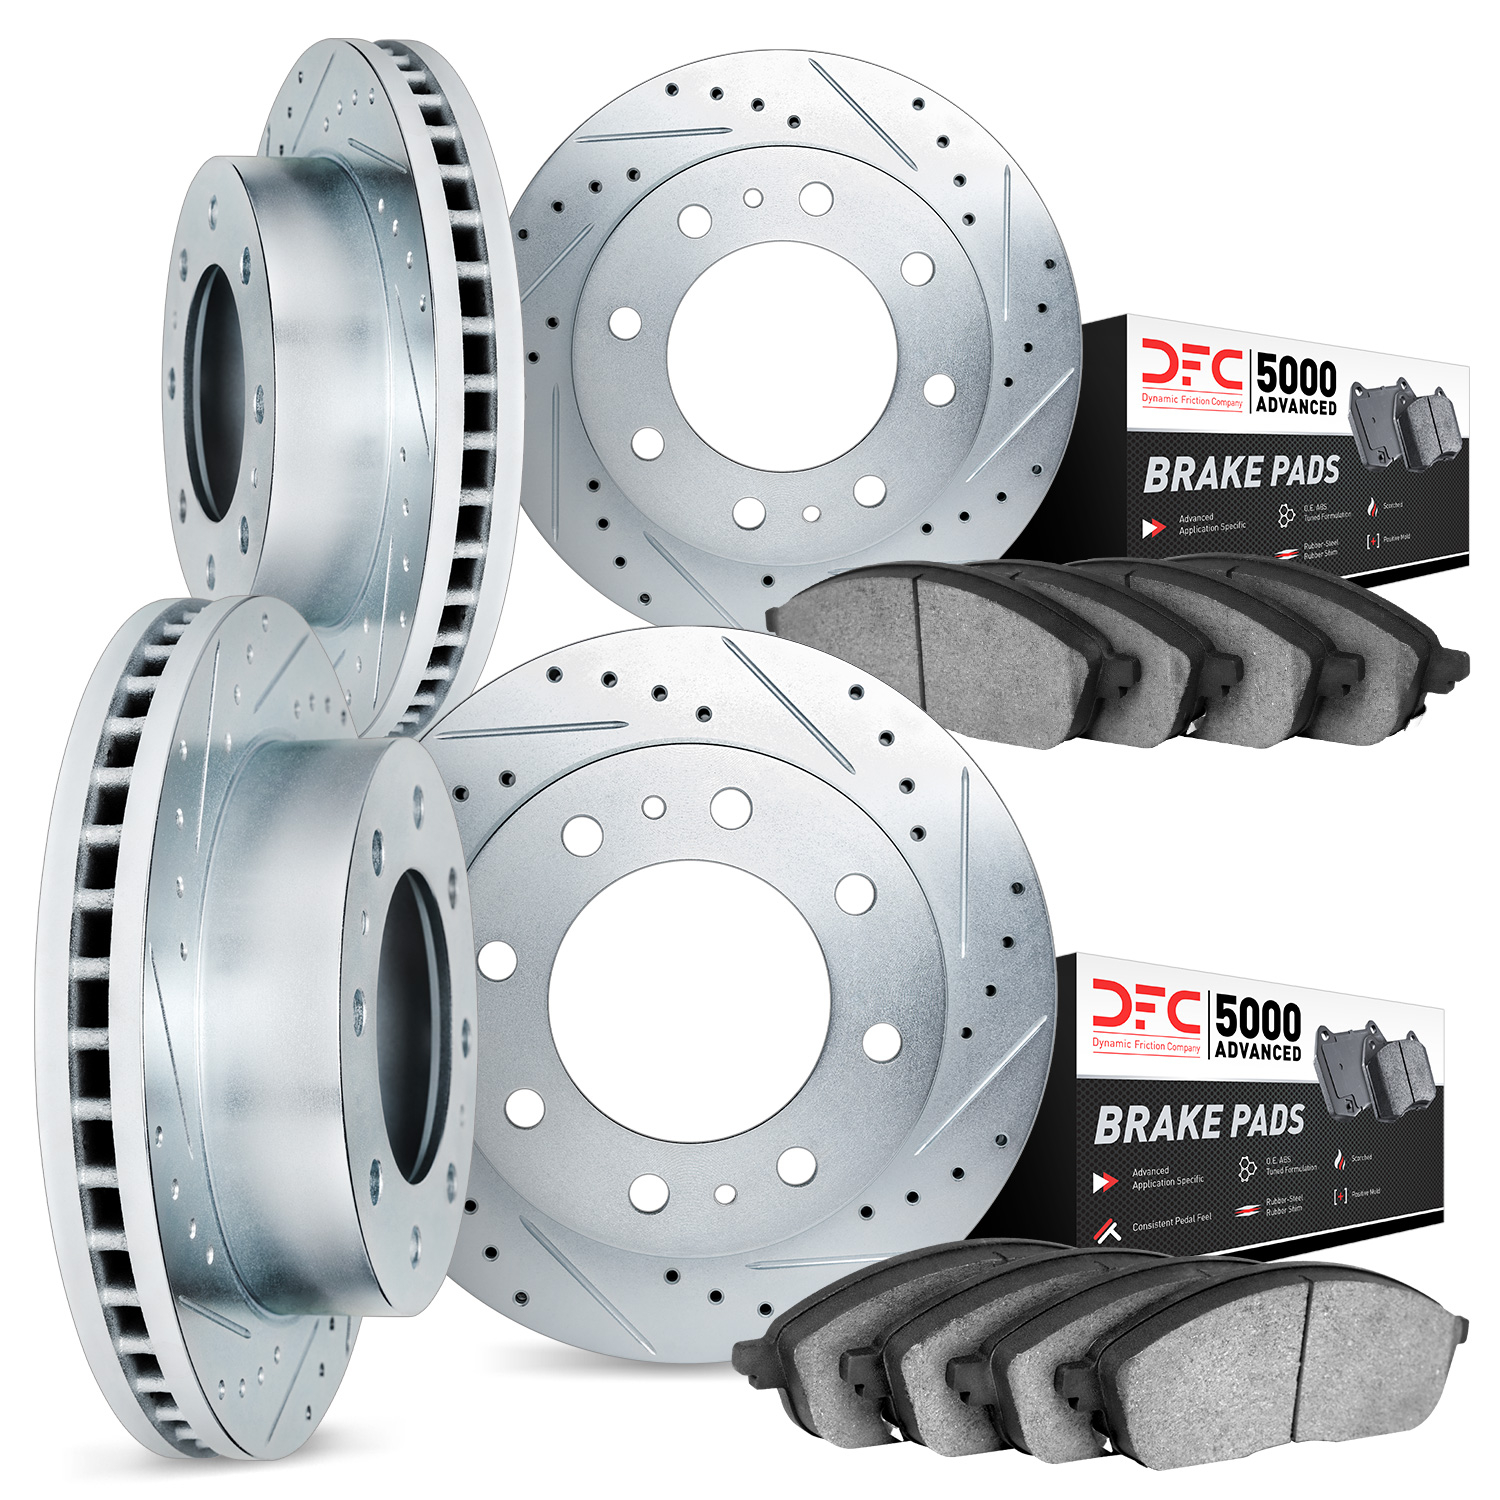 7504-48011 Drilled/Slotted Brake Rotors w/5000 Advanced Brake Pads Kit [Silver], 2003-2005 GM, Position: Front and Rear